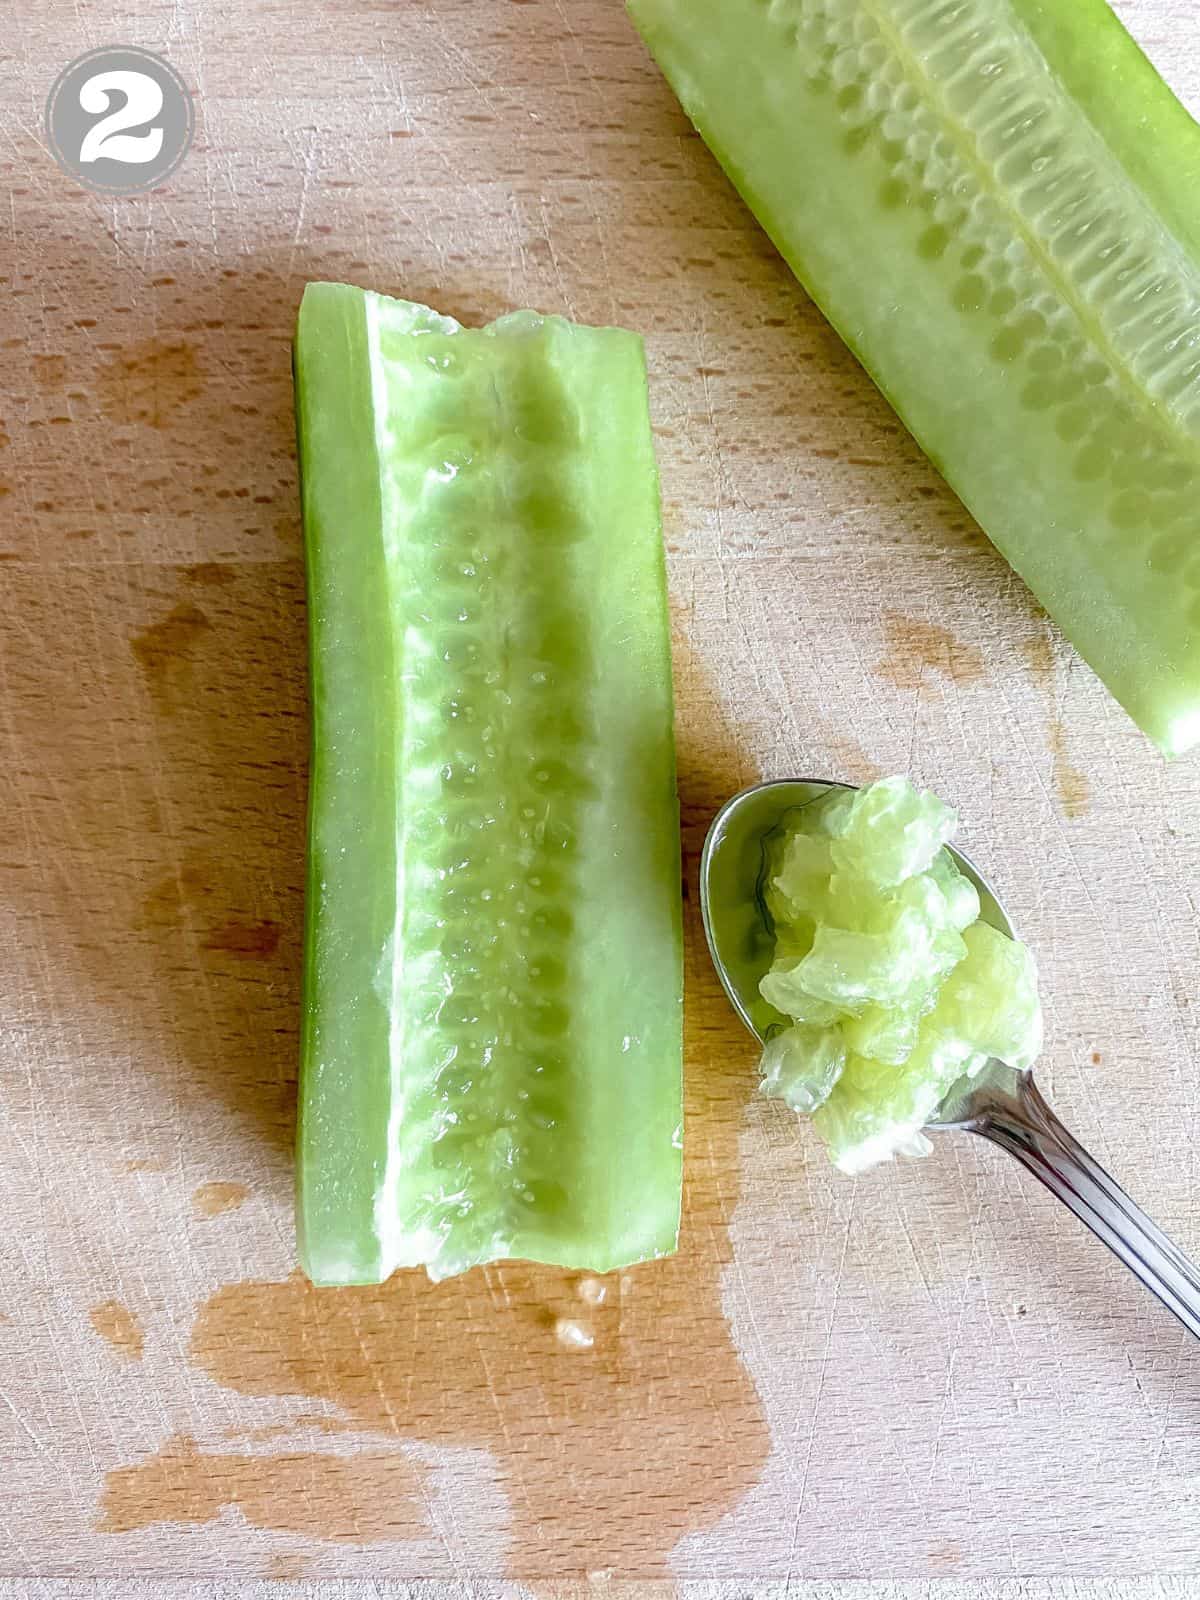 cucumber with seeds removed next to a spoonful of cucumber seeds labelled number two.